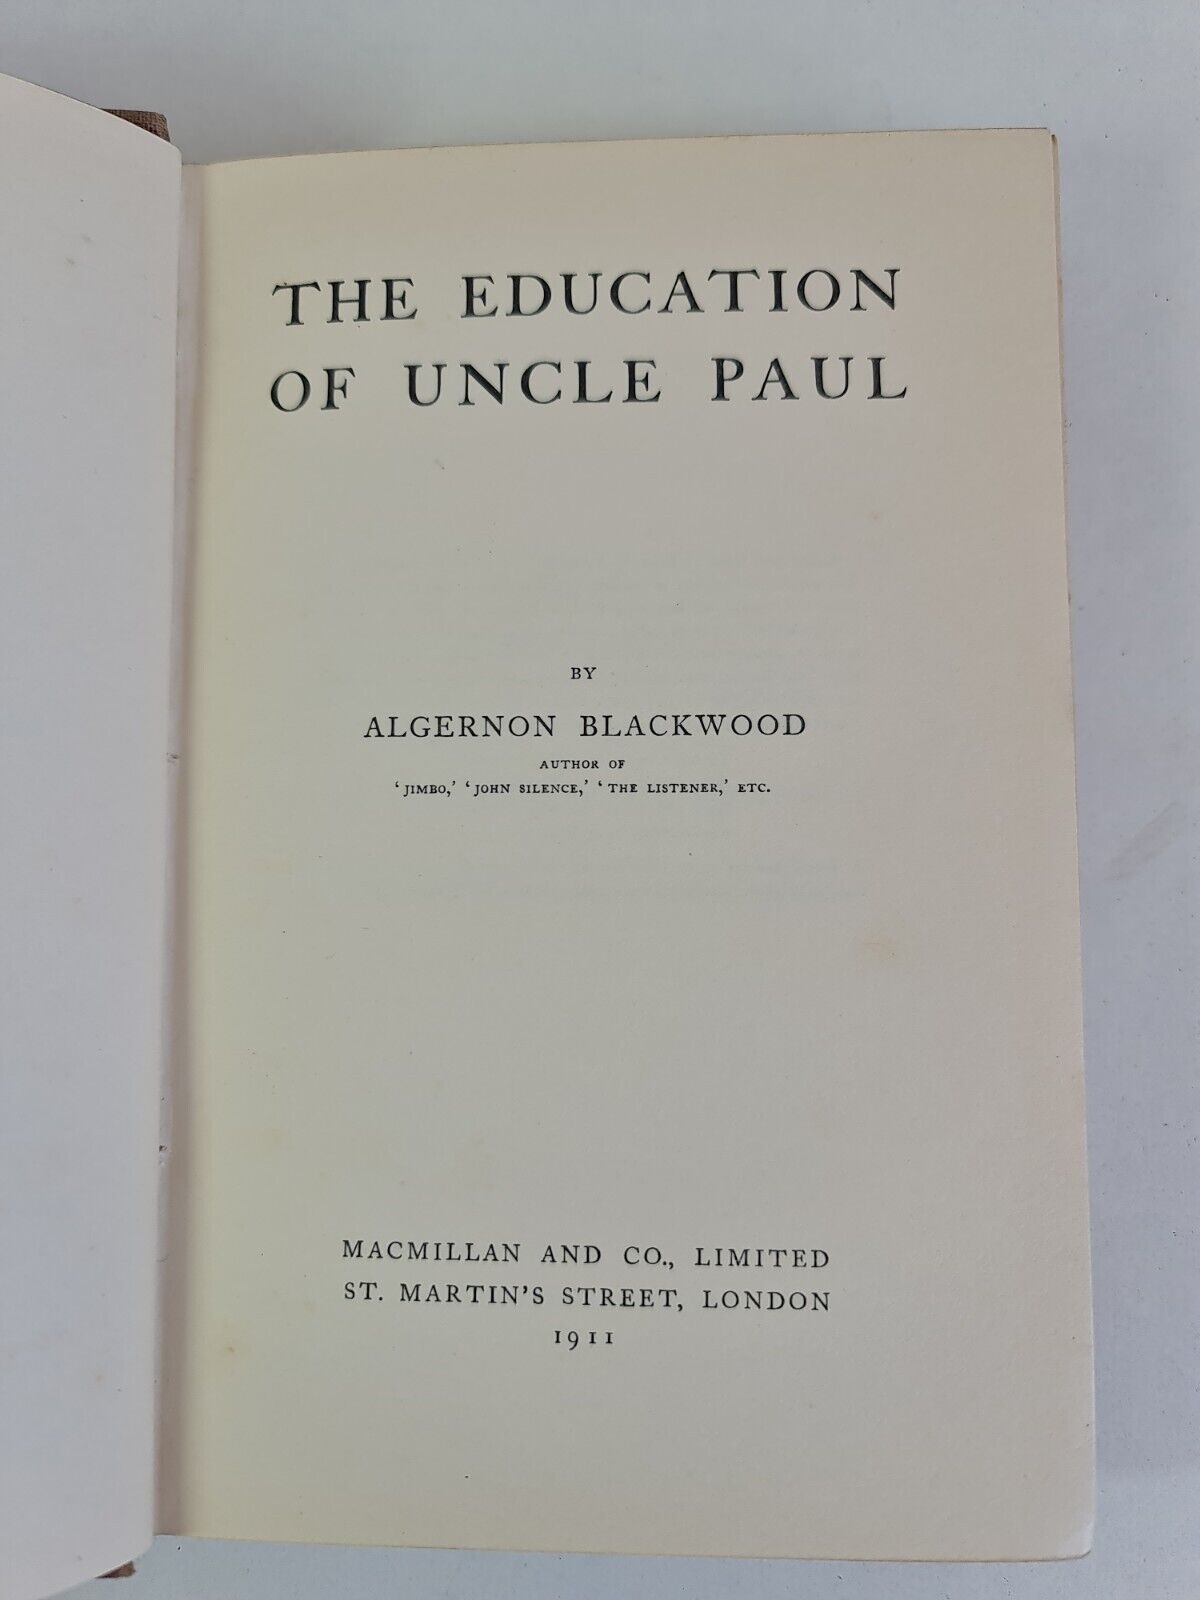 The Education of Uncle Paul by Algernon Blackwood (1911)